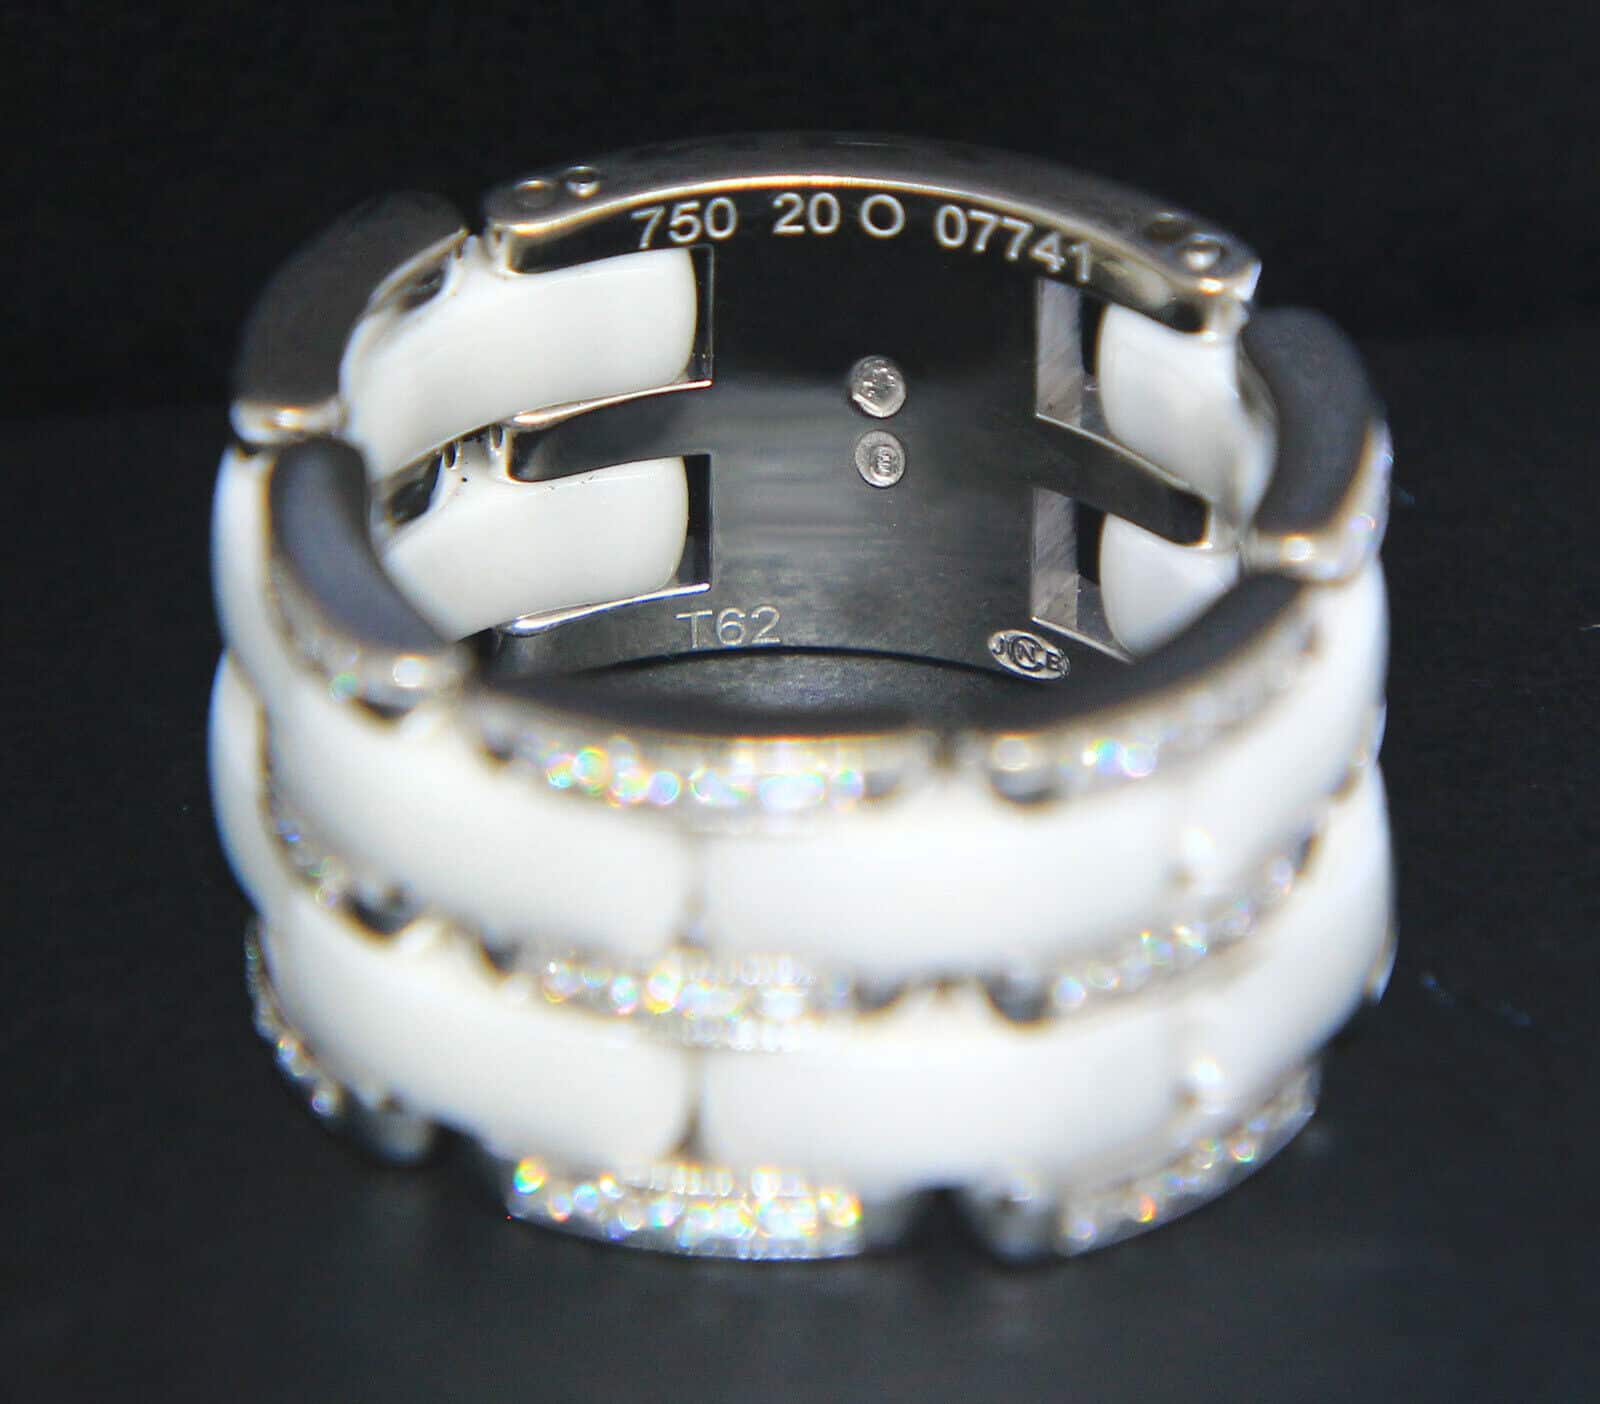 Chanel Ultra Wide 18k White Gold Diamond White Ceramic Ring Size 62 +Box  J2645 - Jewels in Time